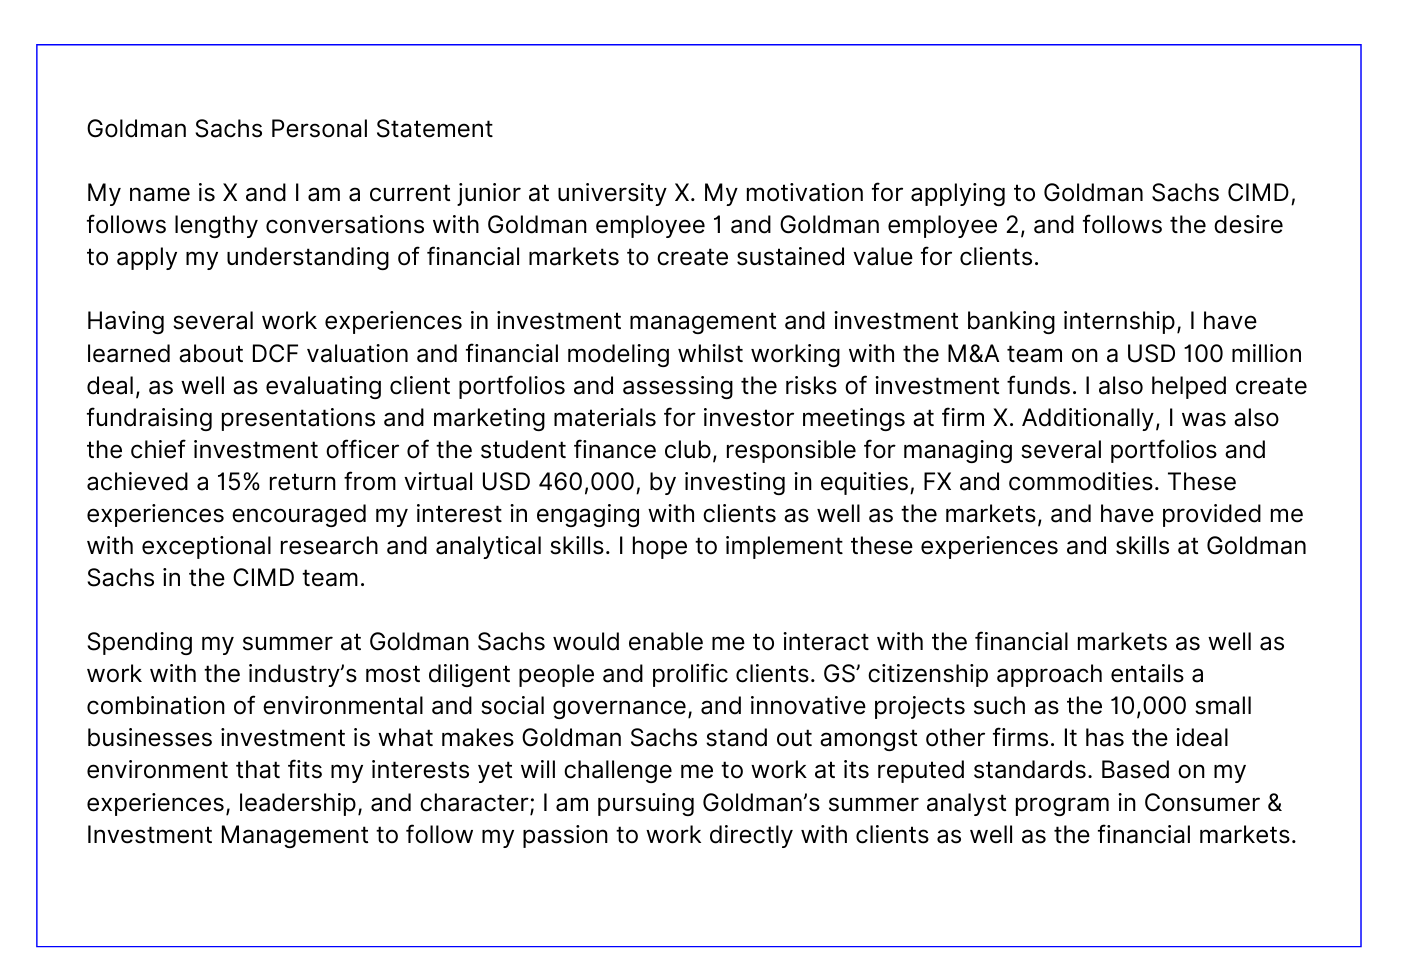 Goldman Sachs Cover Letter Free Sample How To Write Unstop formerly Dare2Compete 